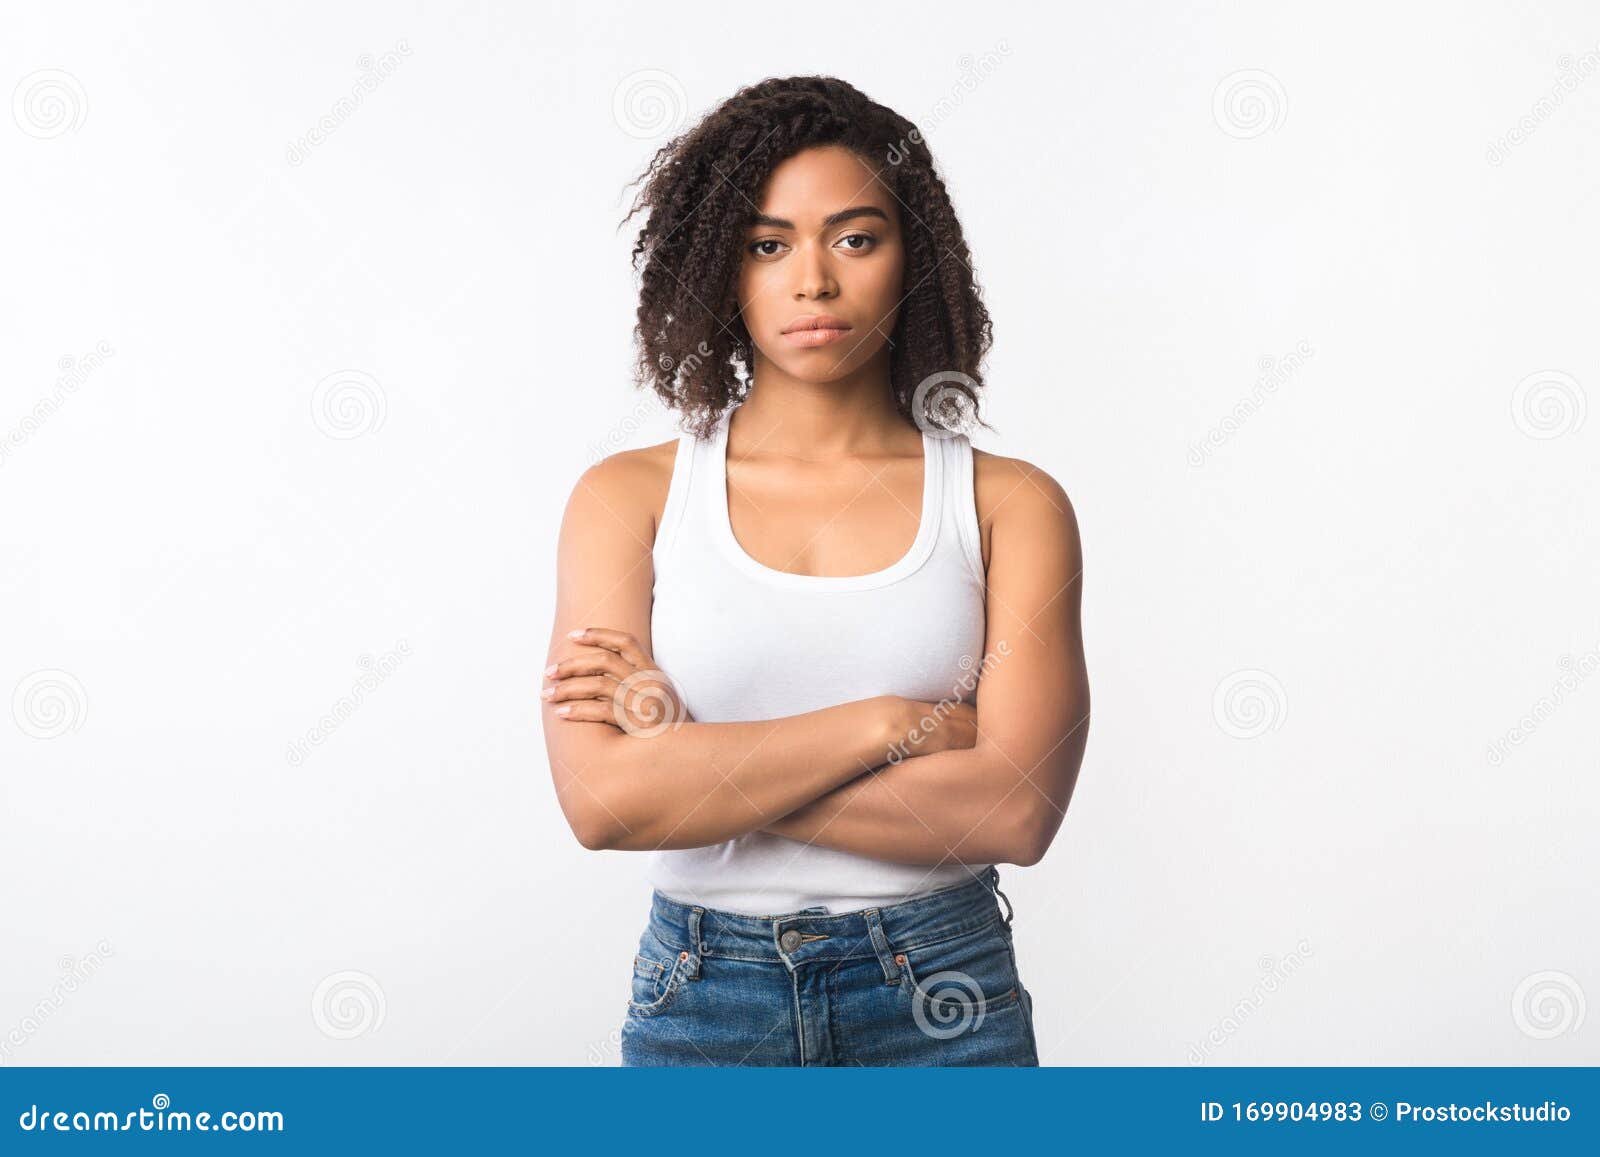 Closeup Of Frustrated Afro Girl With Crossed Arms Stock Image - Image